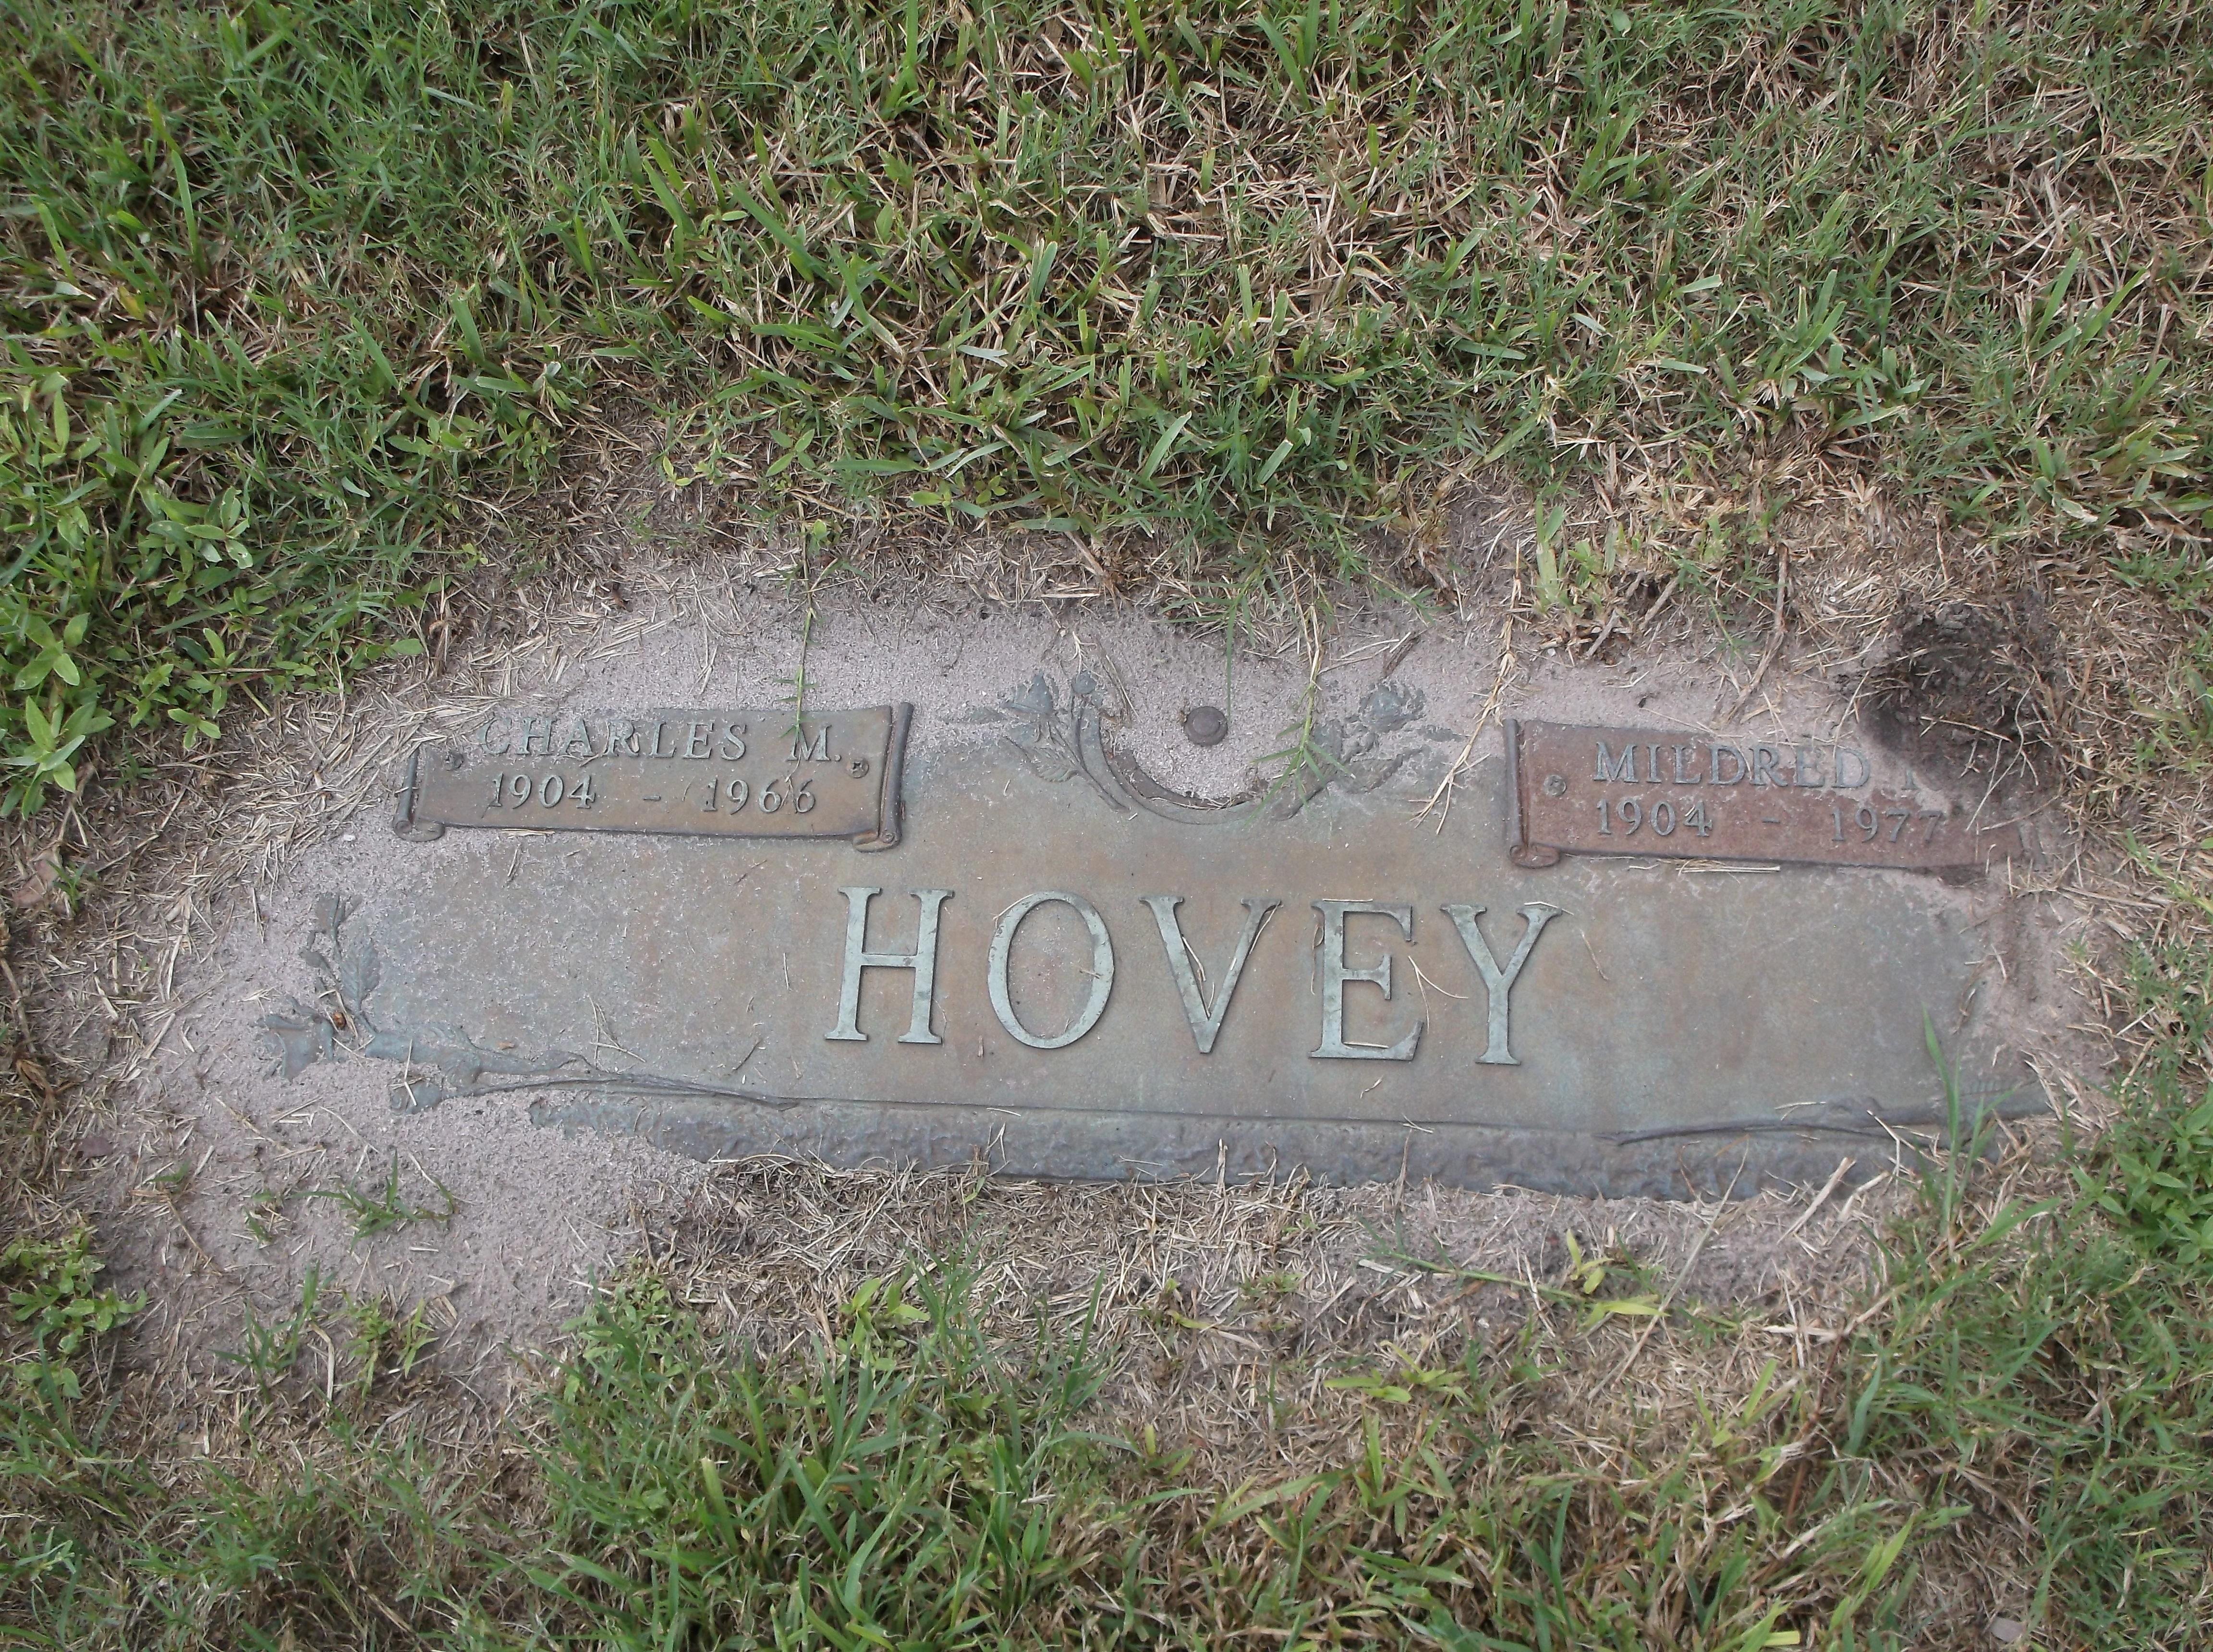 Mildred Hovey